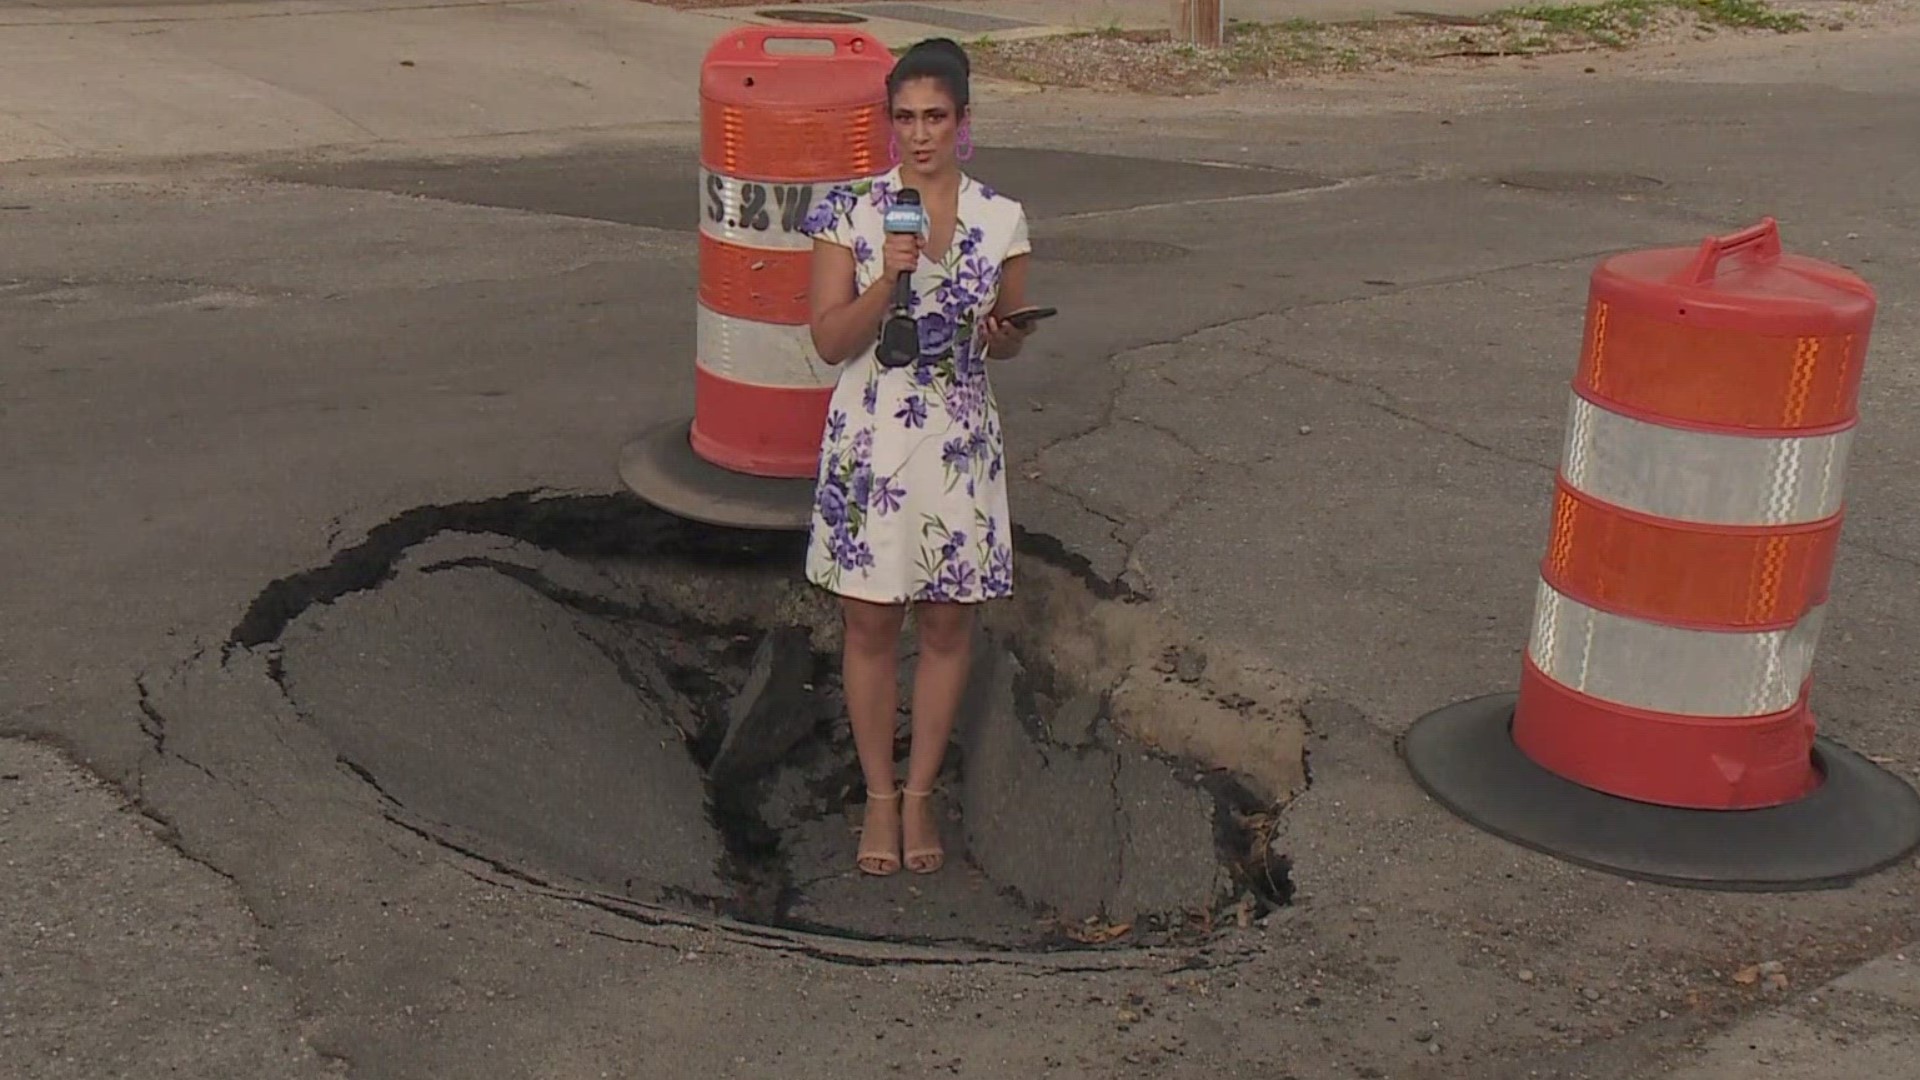 Baudin Street and Carrolton Avenue in Mid-City, two gaping holes appeared this week and residents have had to barricade them off to keep people safe.